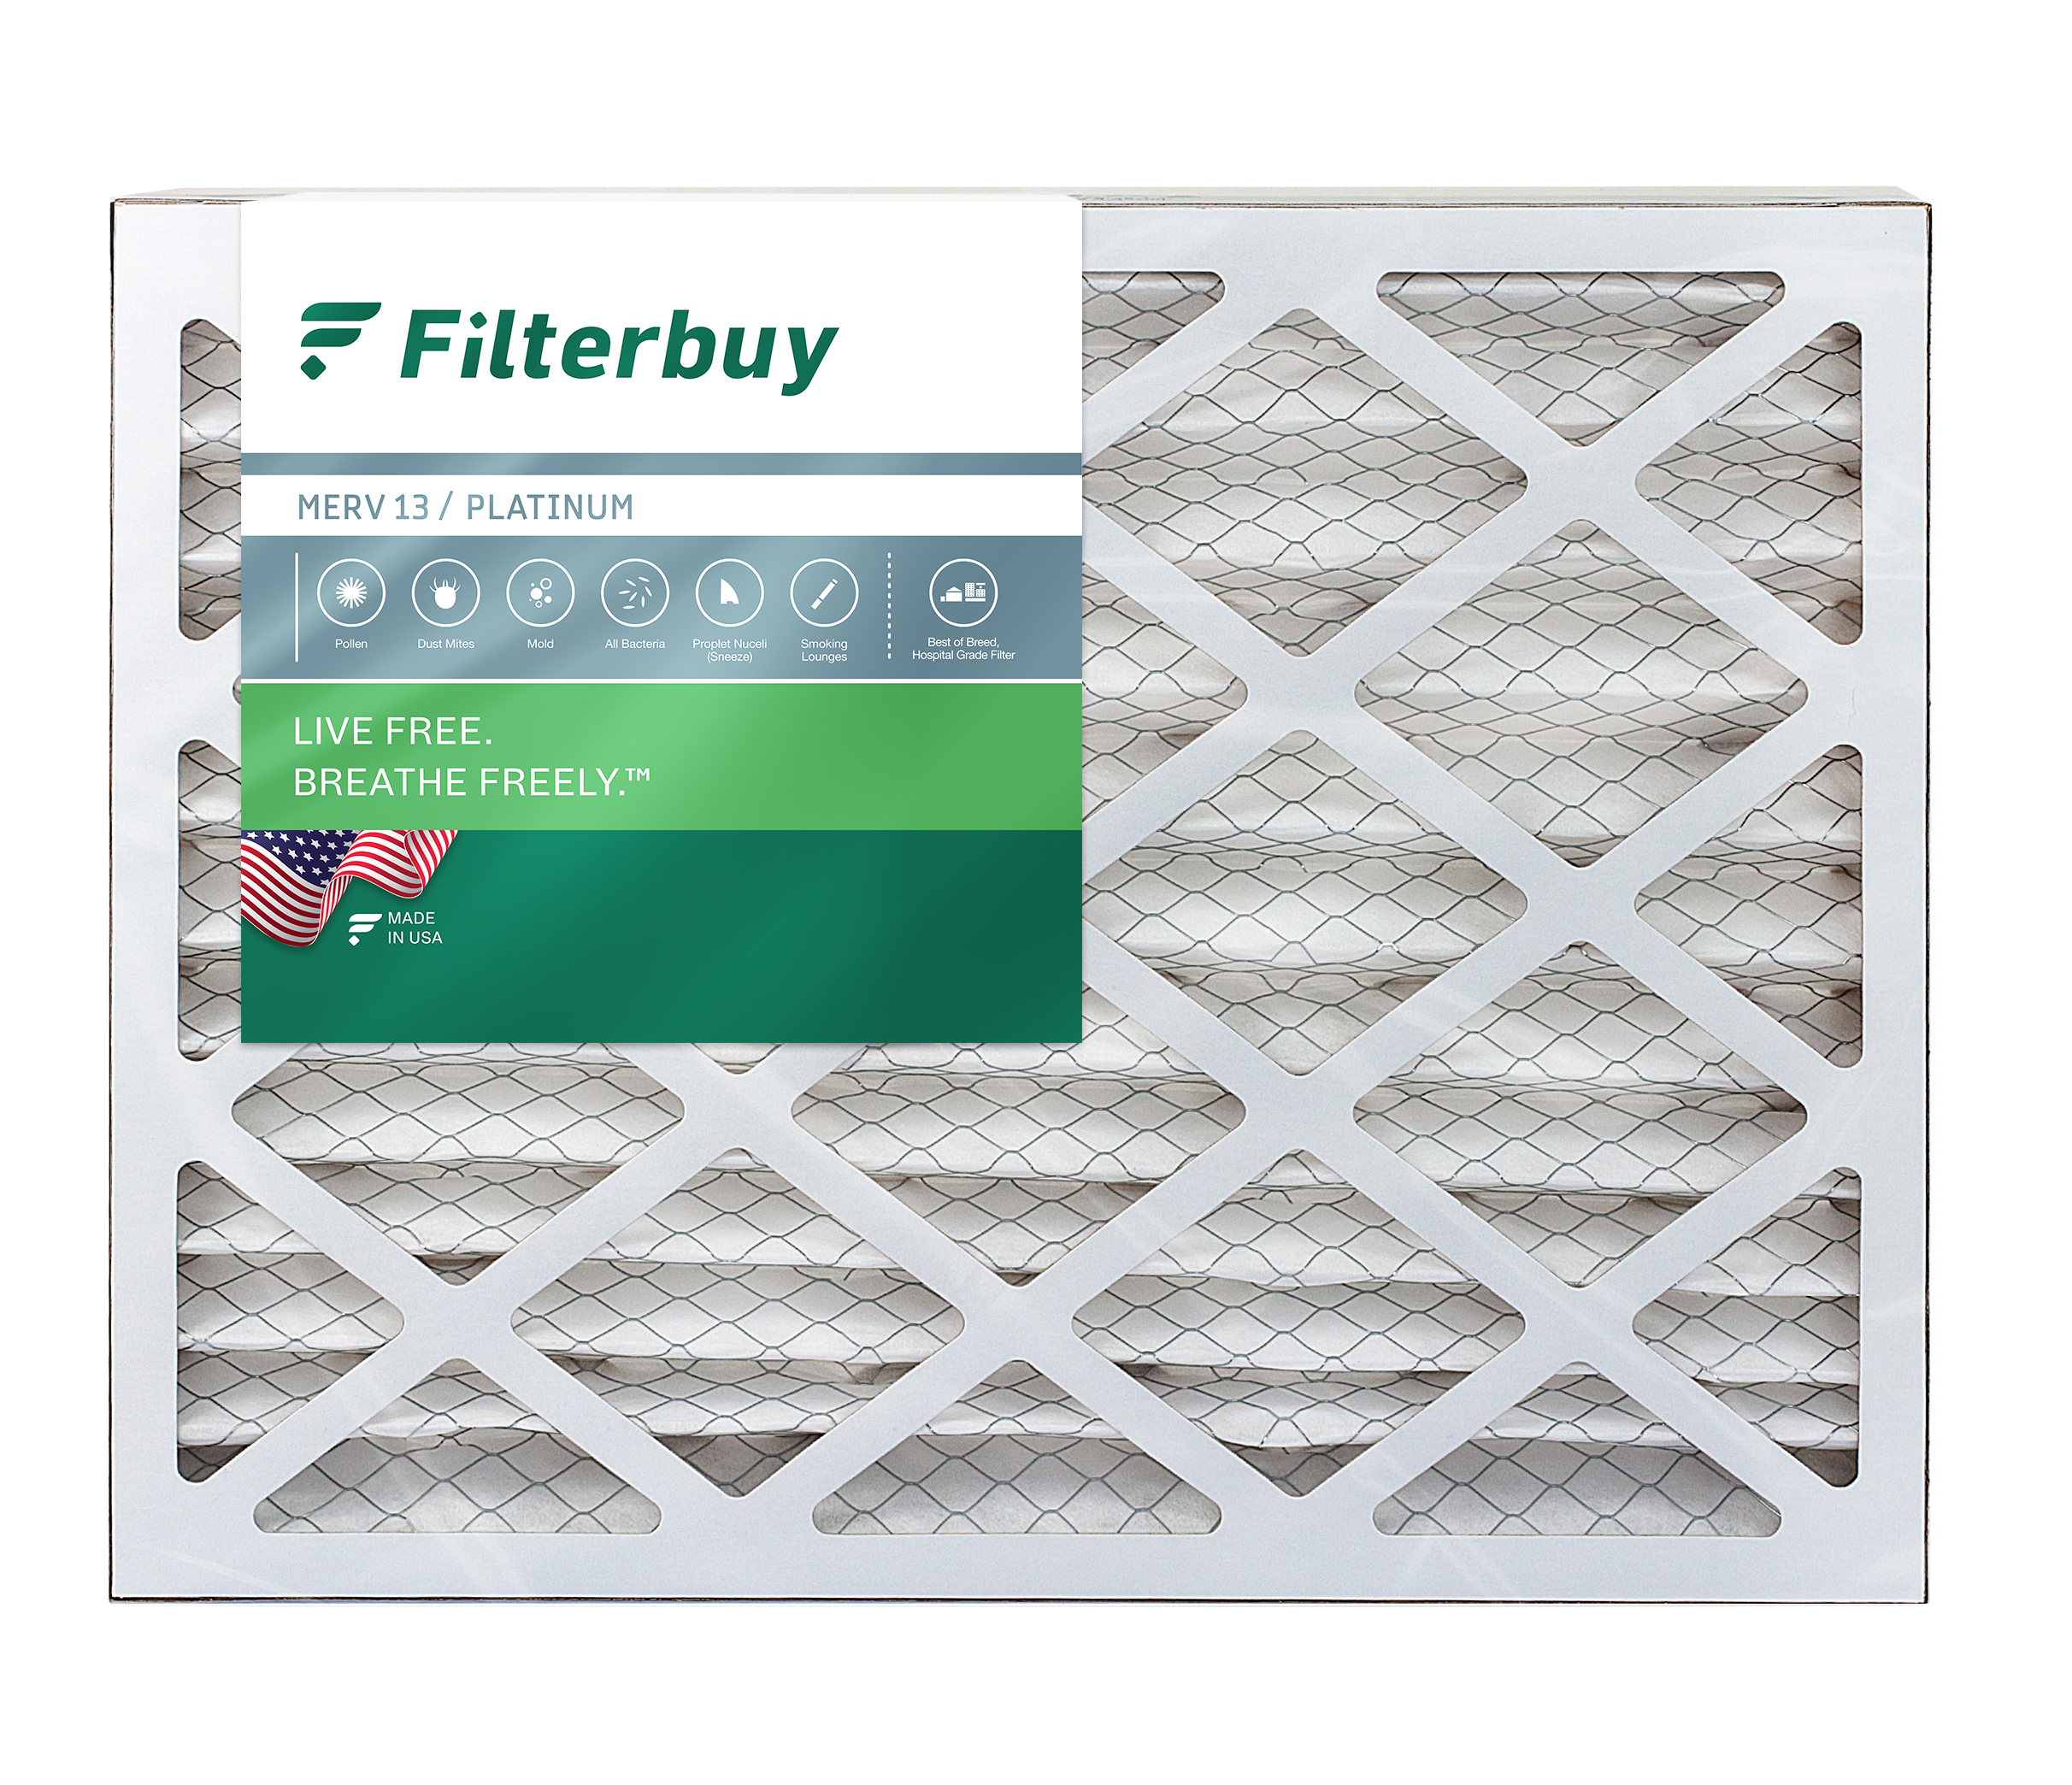 Silver FilterBuy 12x16x2 MERV 8 Pleated AC Furnace Air Filter, 12x16x2 Pack of 2 Filters